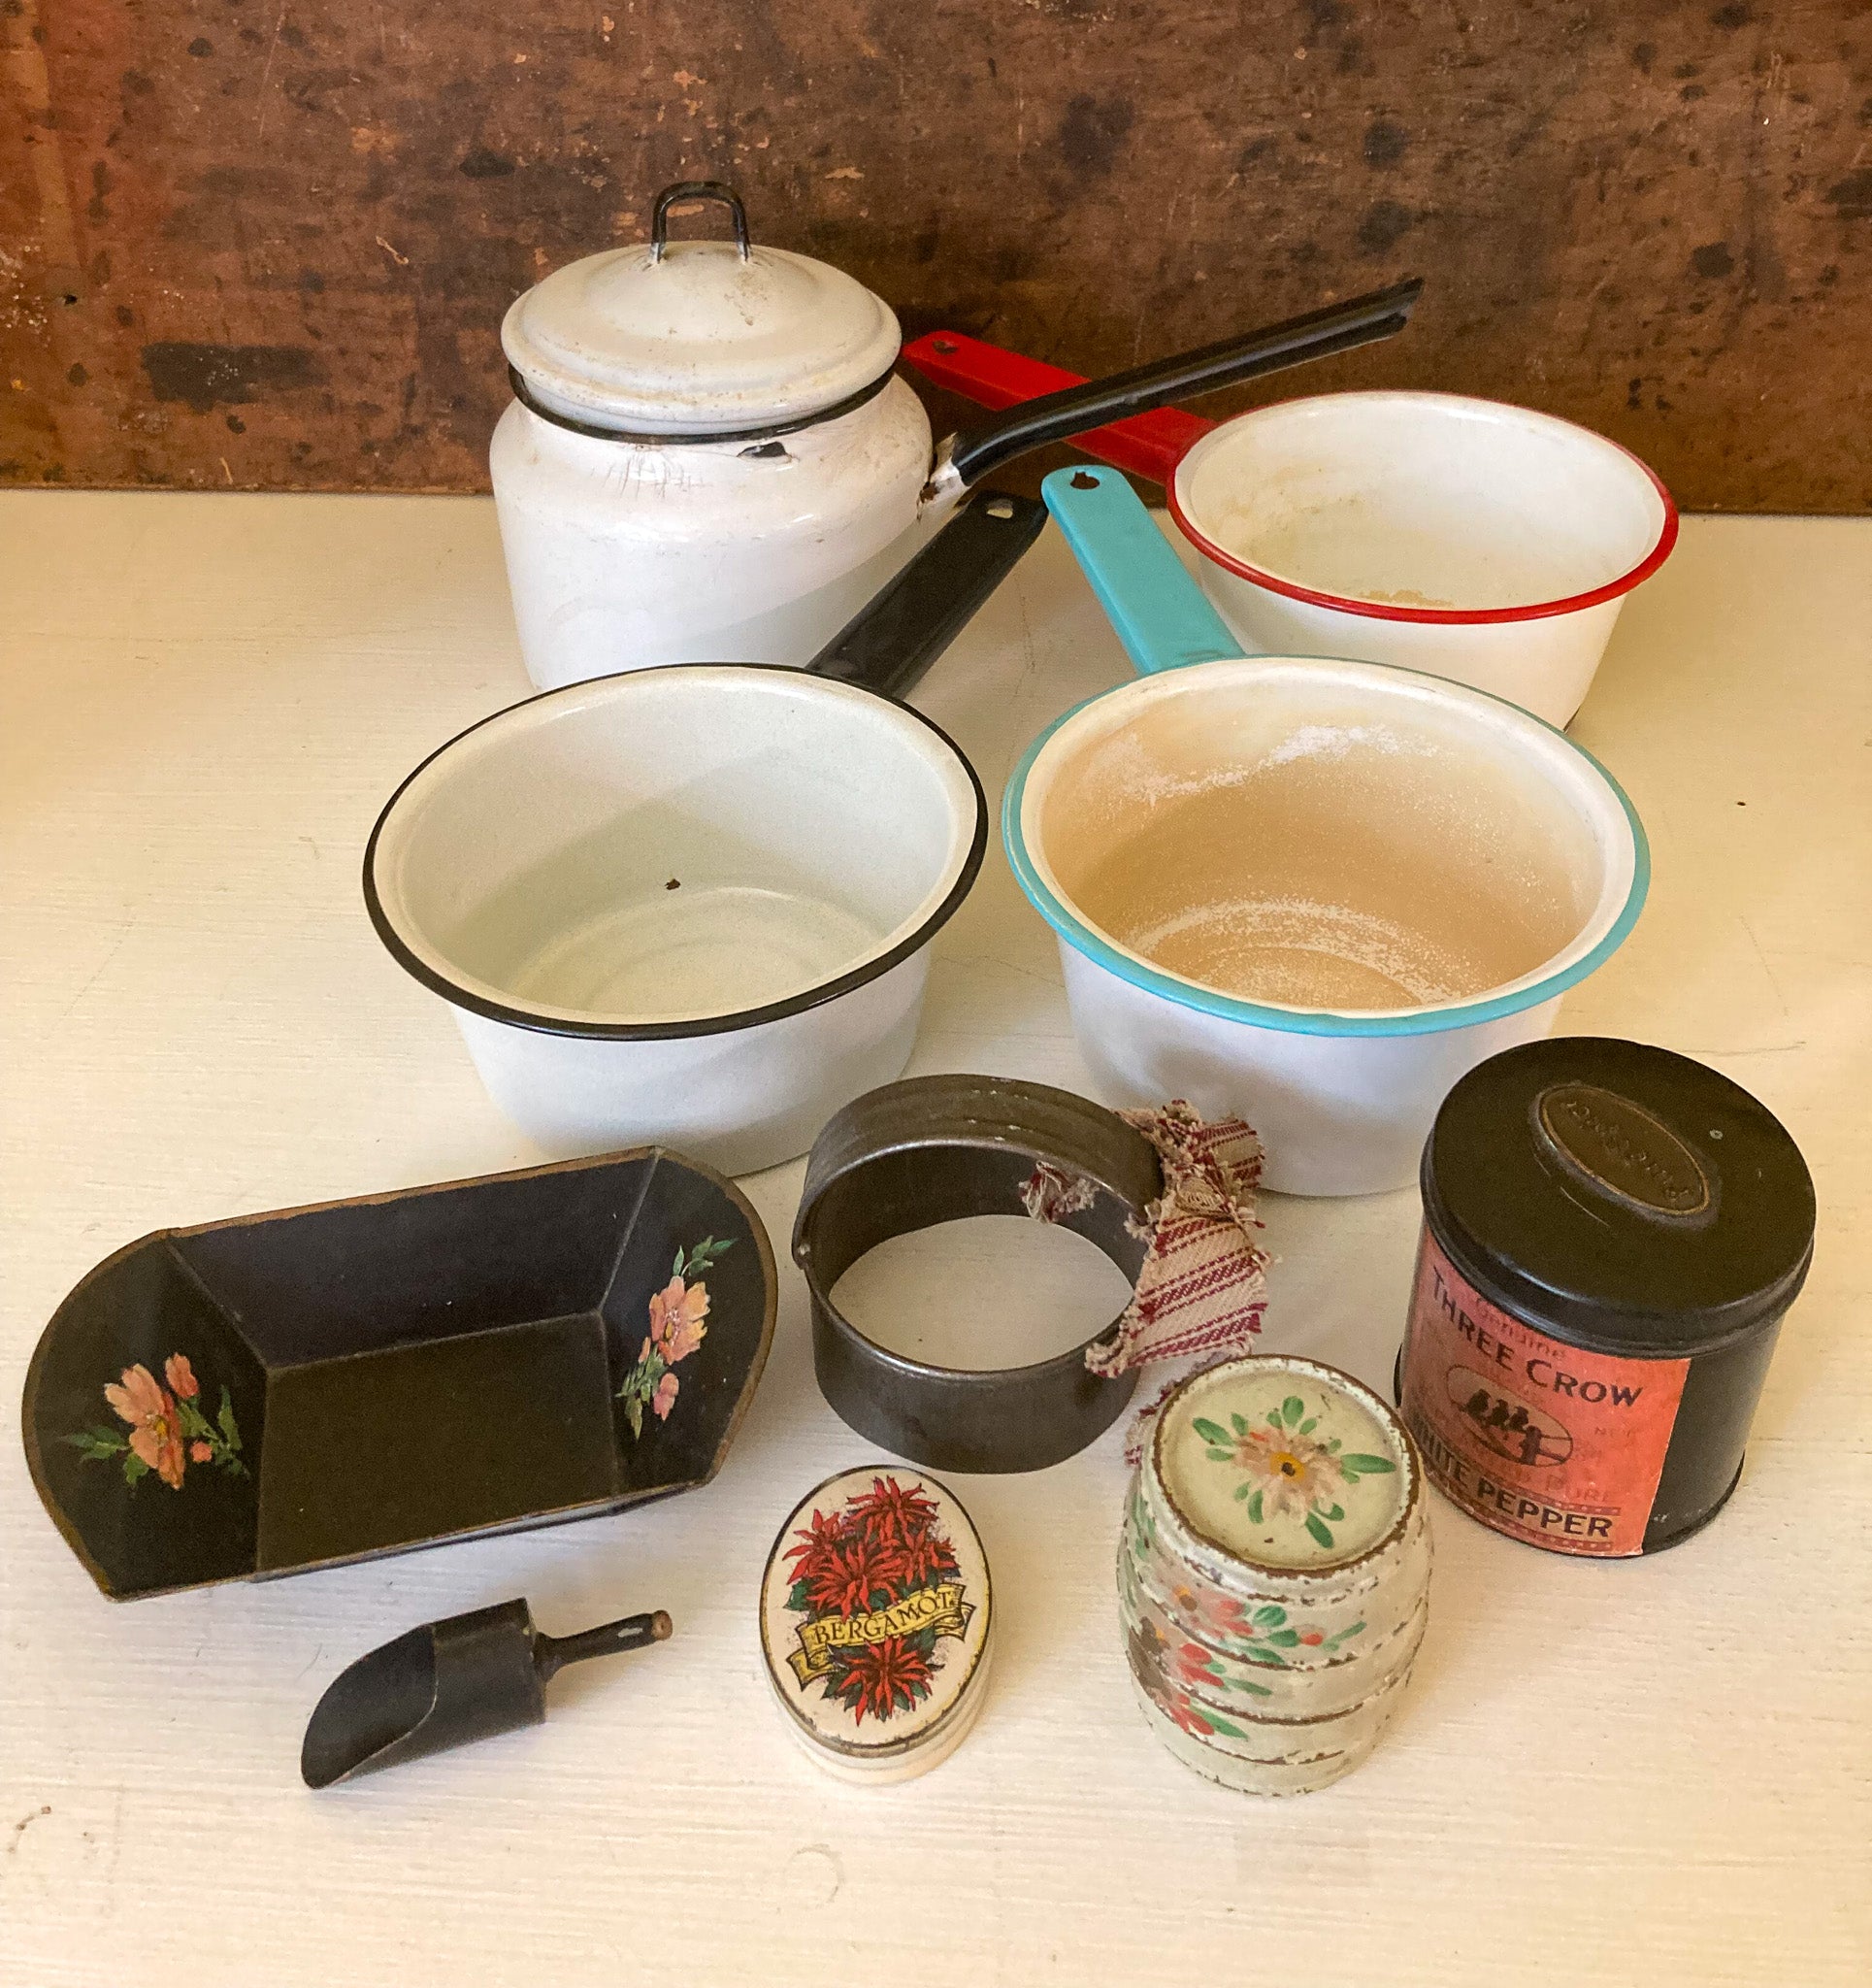 Clearing the Shelves!  Vintage Enamelware Pots, Biscuit Cutter, Nut or Candy Dish with Scoop, 2 Reproduction Tins, Antique Barrel Shaped Bank